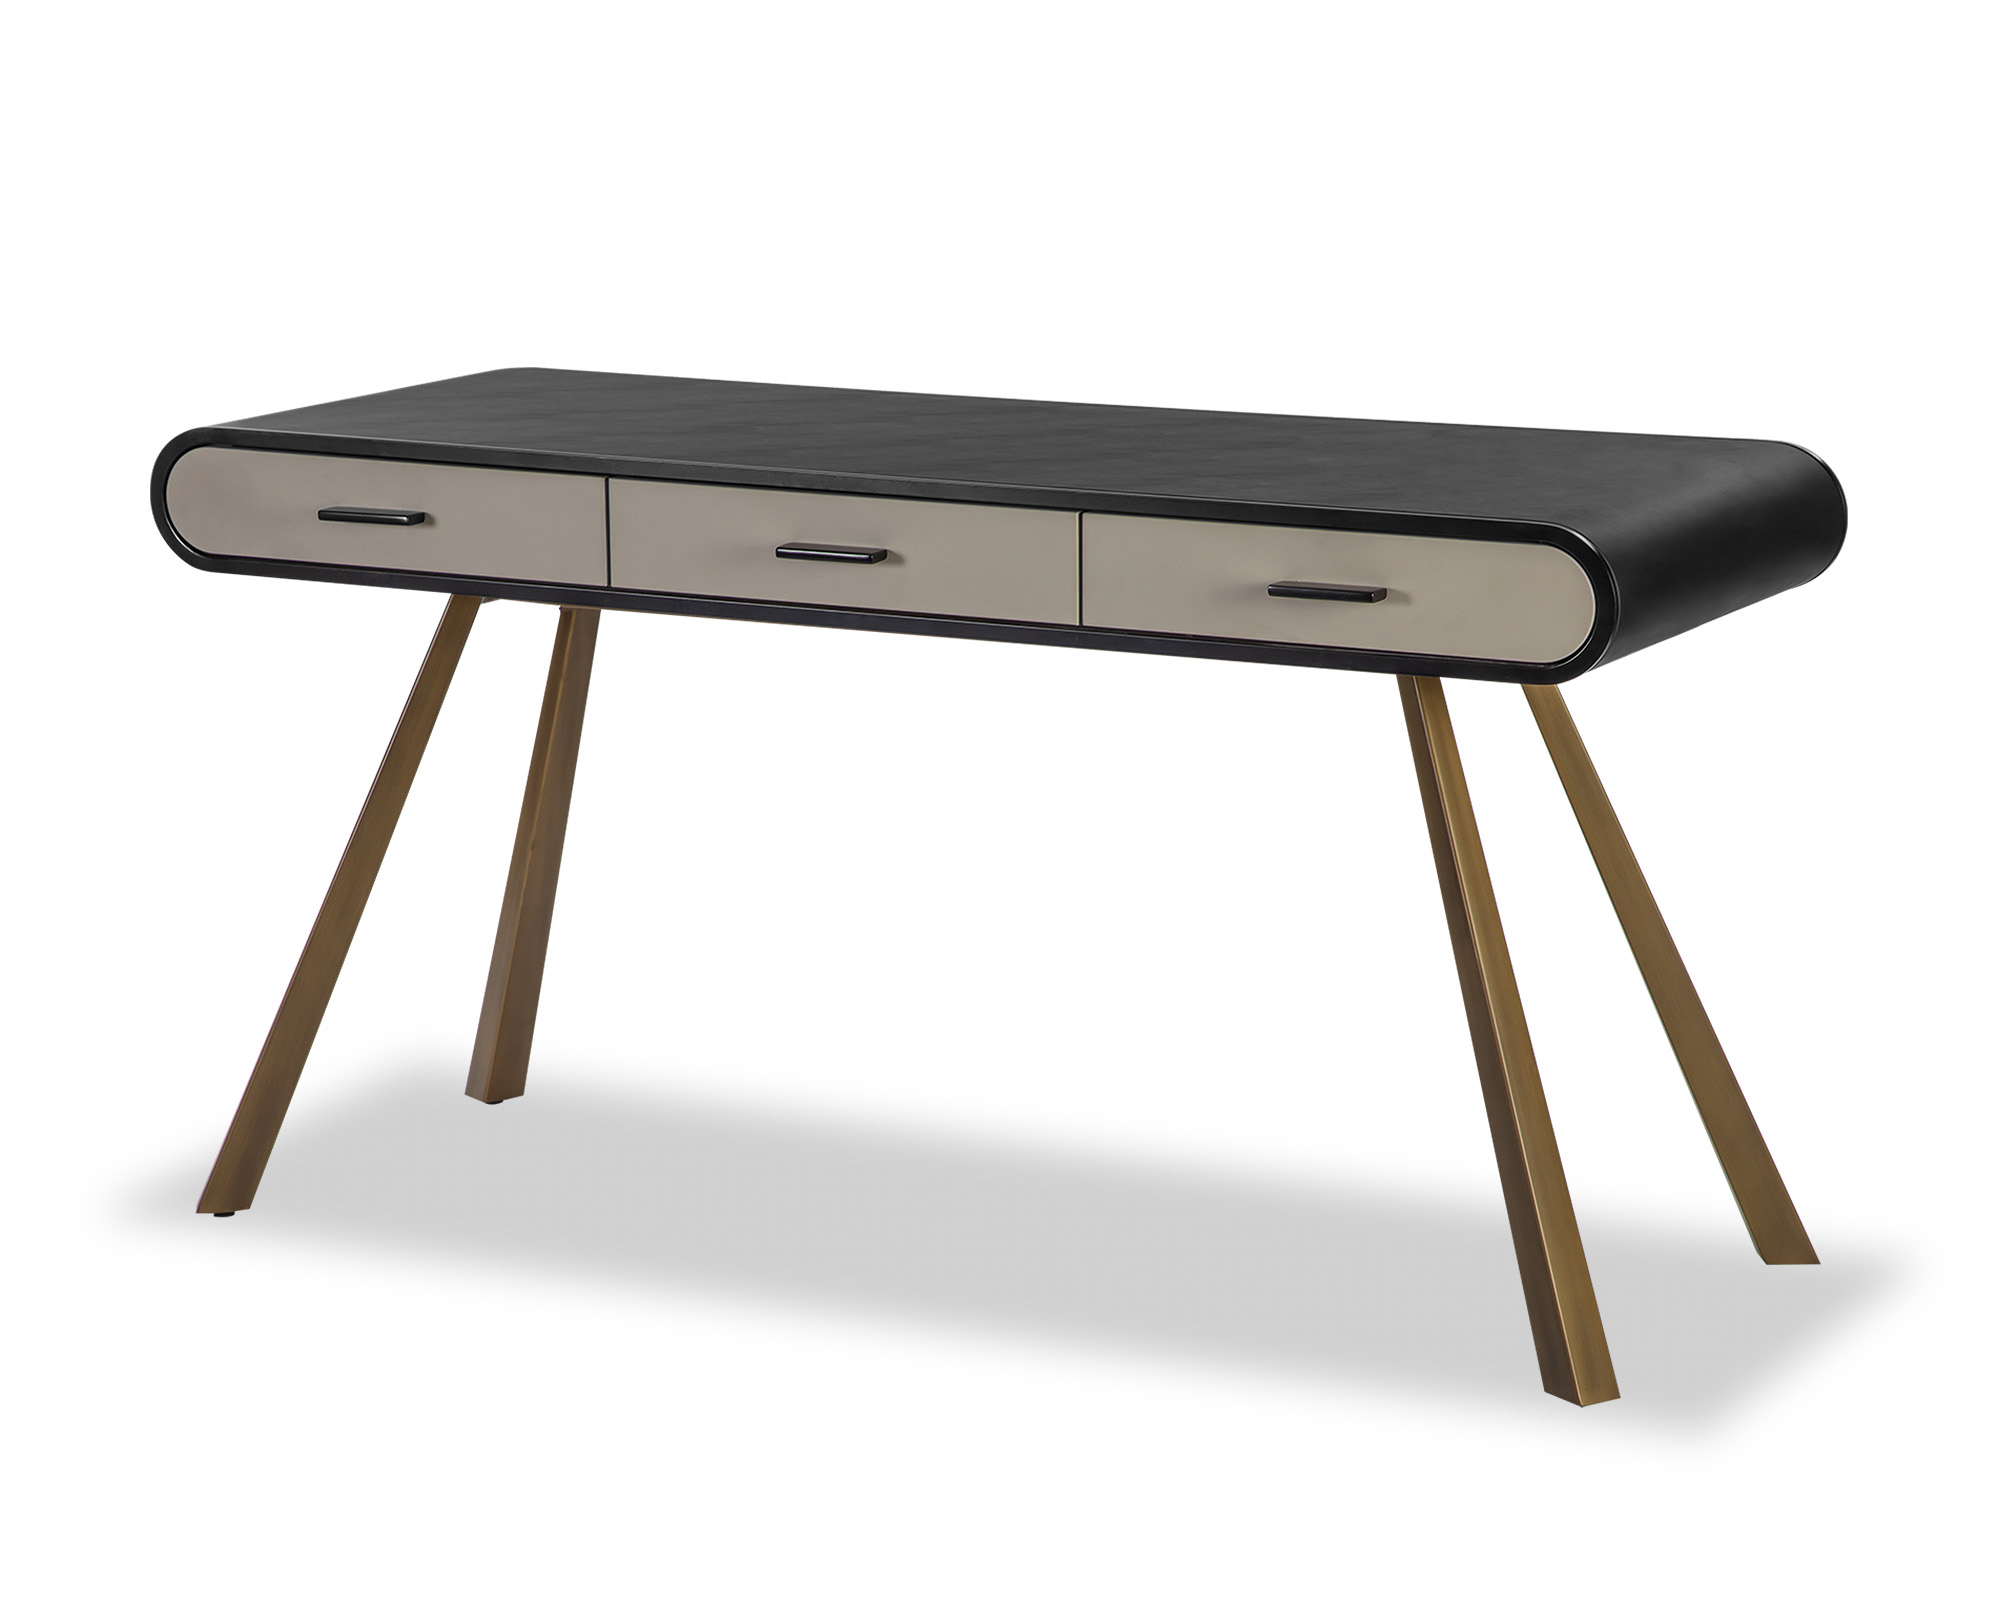 Liang & Eimil Chiado desk in black and grey vegan leather with brass finish legs